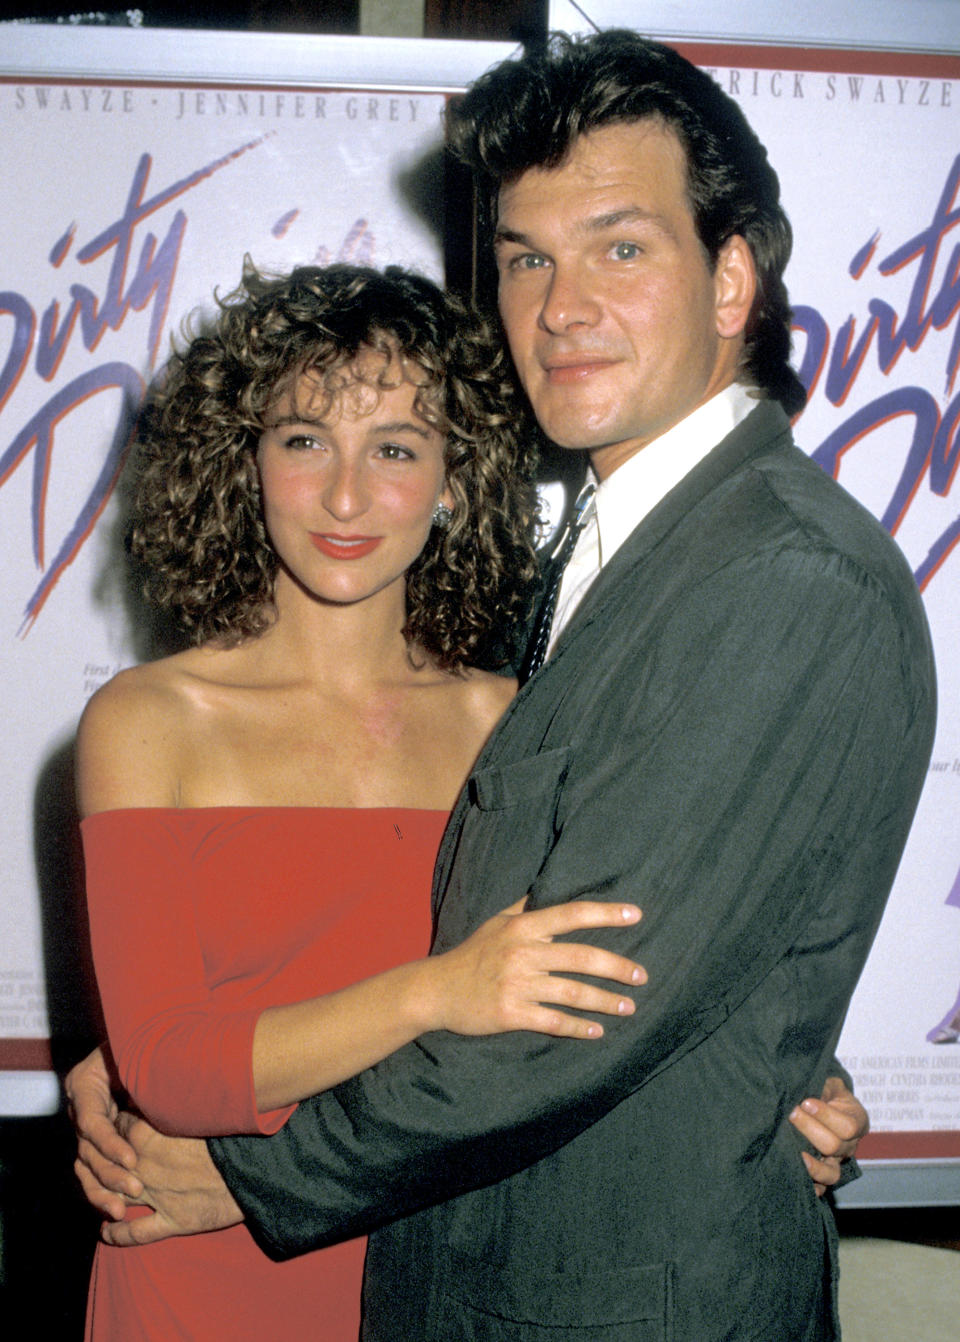 NEW YORK - AUGUST 17: (FILE PHOTO) Actors Jennifer Gray and Patrick Swayze attend the premiere of 'Dirty Dancing'  at the Gemini Theater on August 17, 1987 in New York City.  (Photo by Jim Smeal/WireImage)